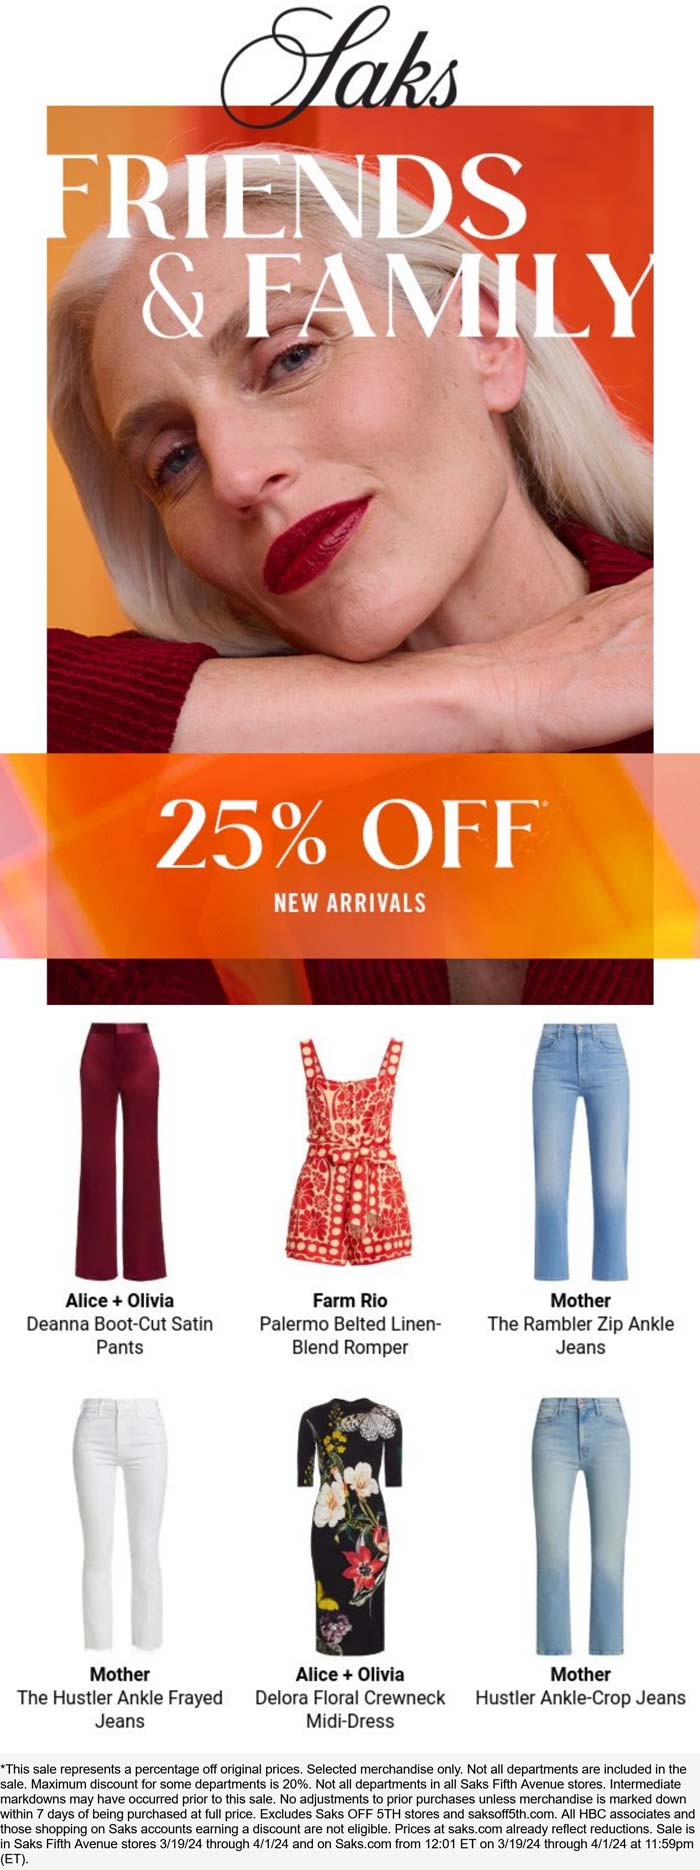 Saks Fifth Avenue stores Coupon  25% off new arrivals today at Saks Fifth Avenue #saksfifthavenue 